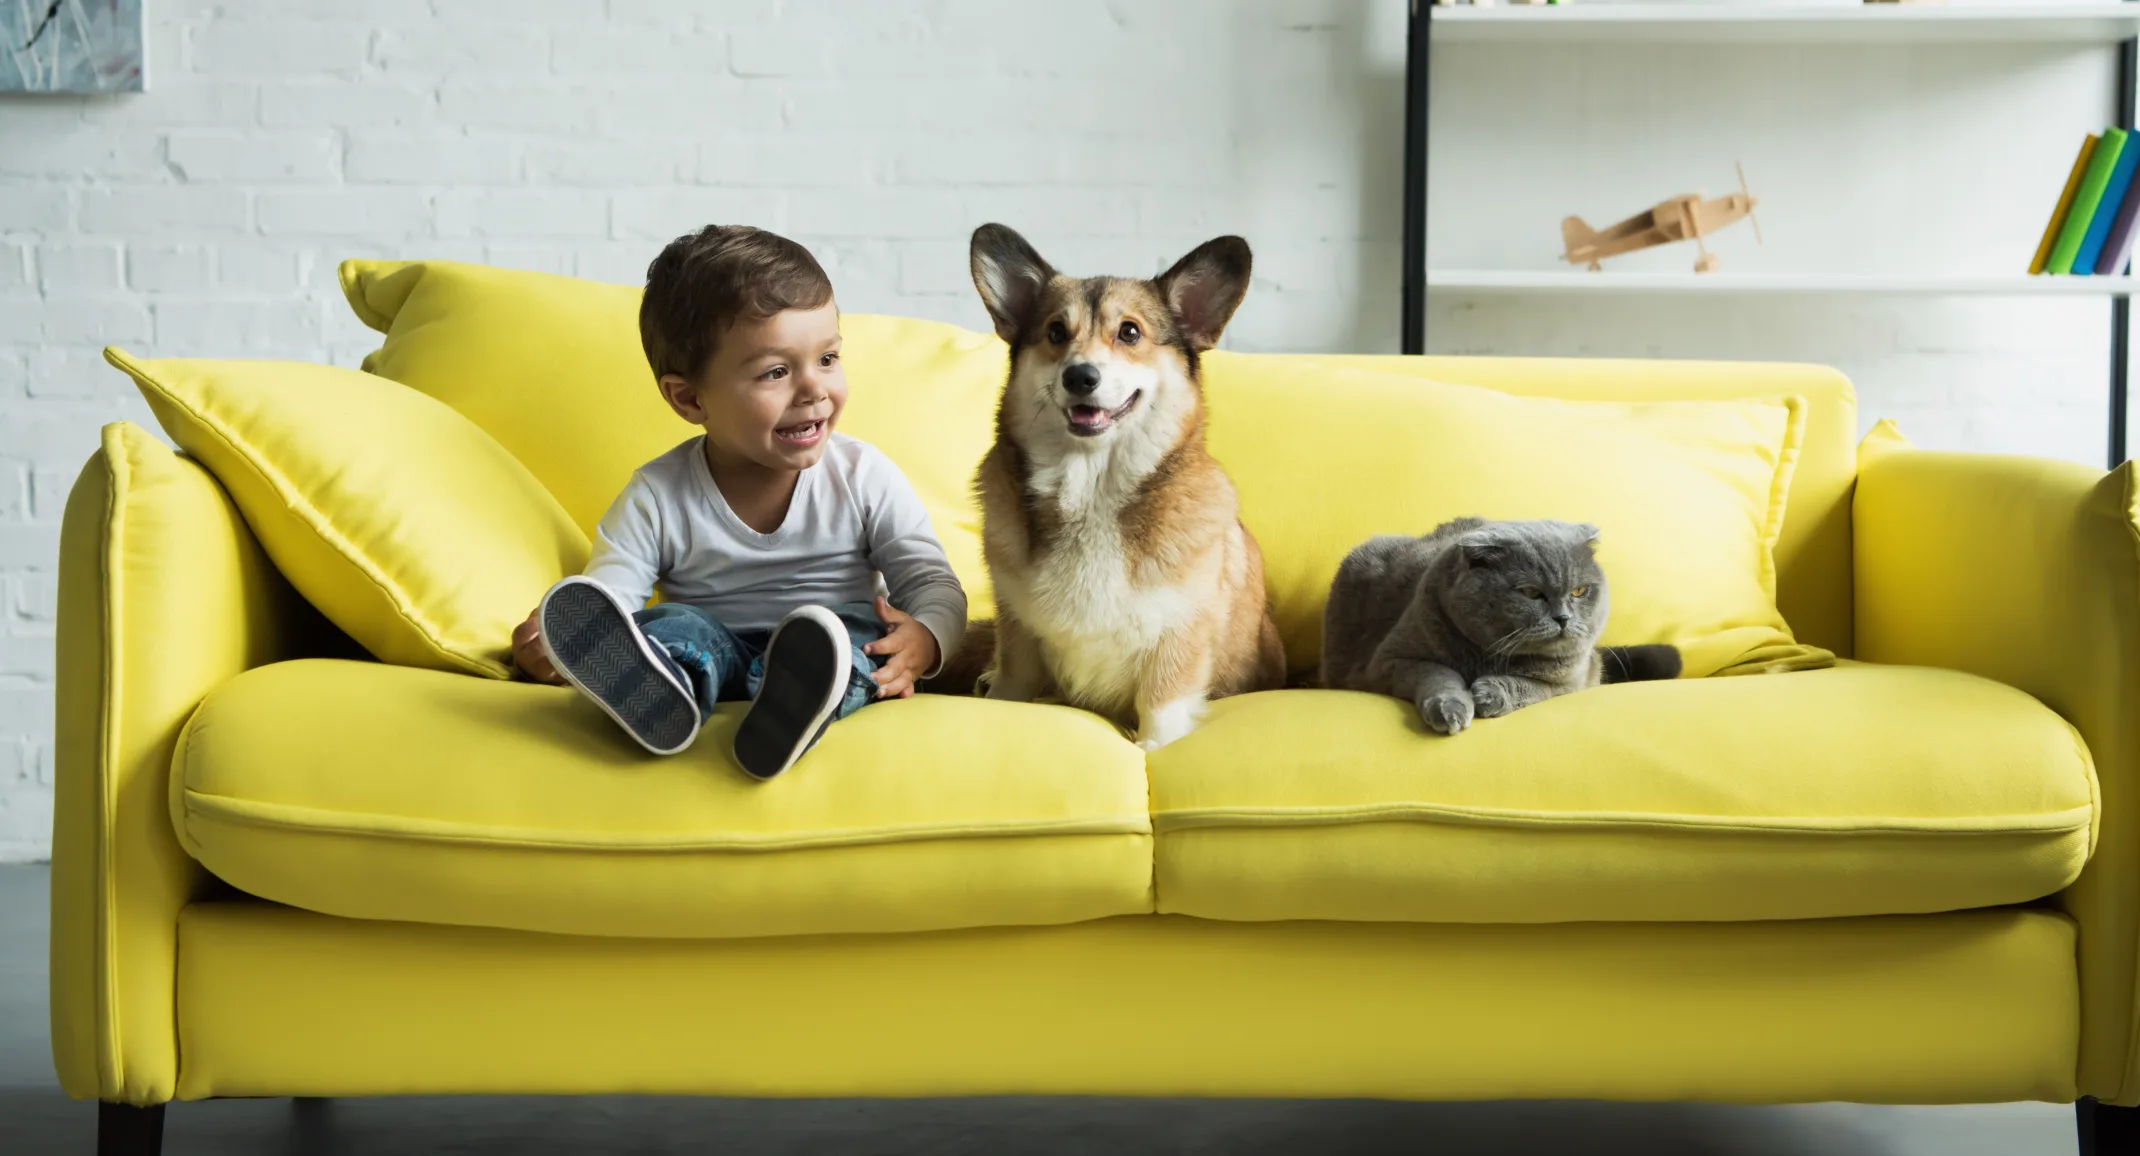 A child, cat, and dog sitting on a green couch